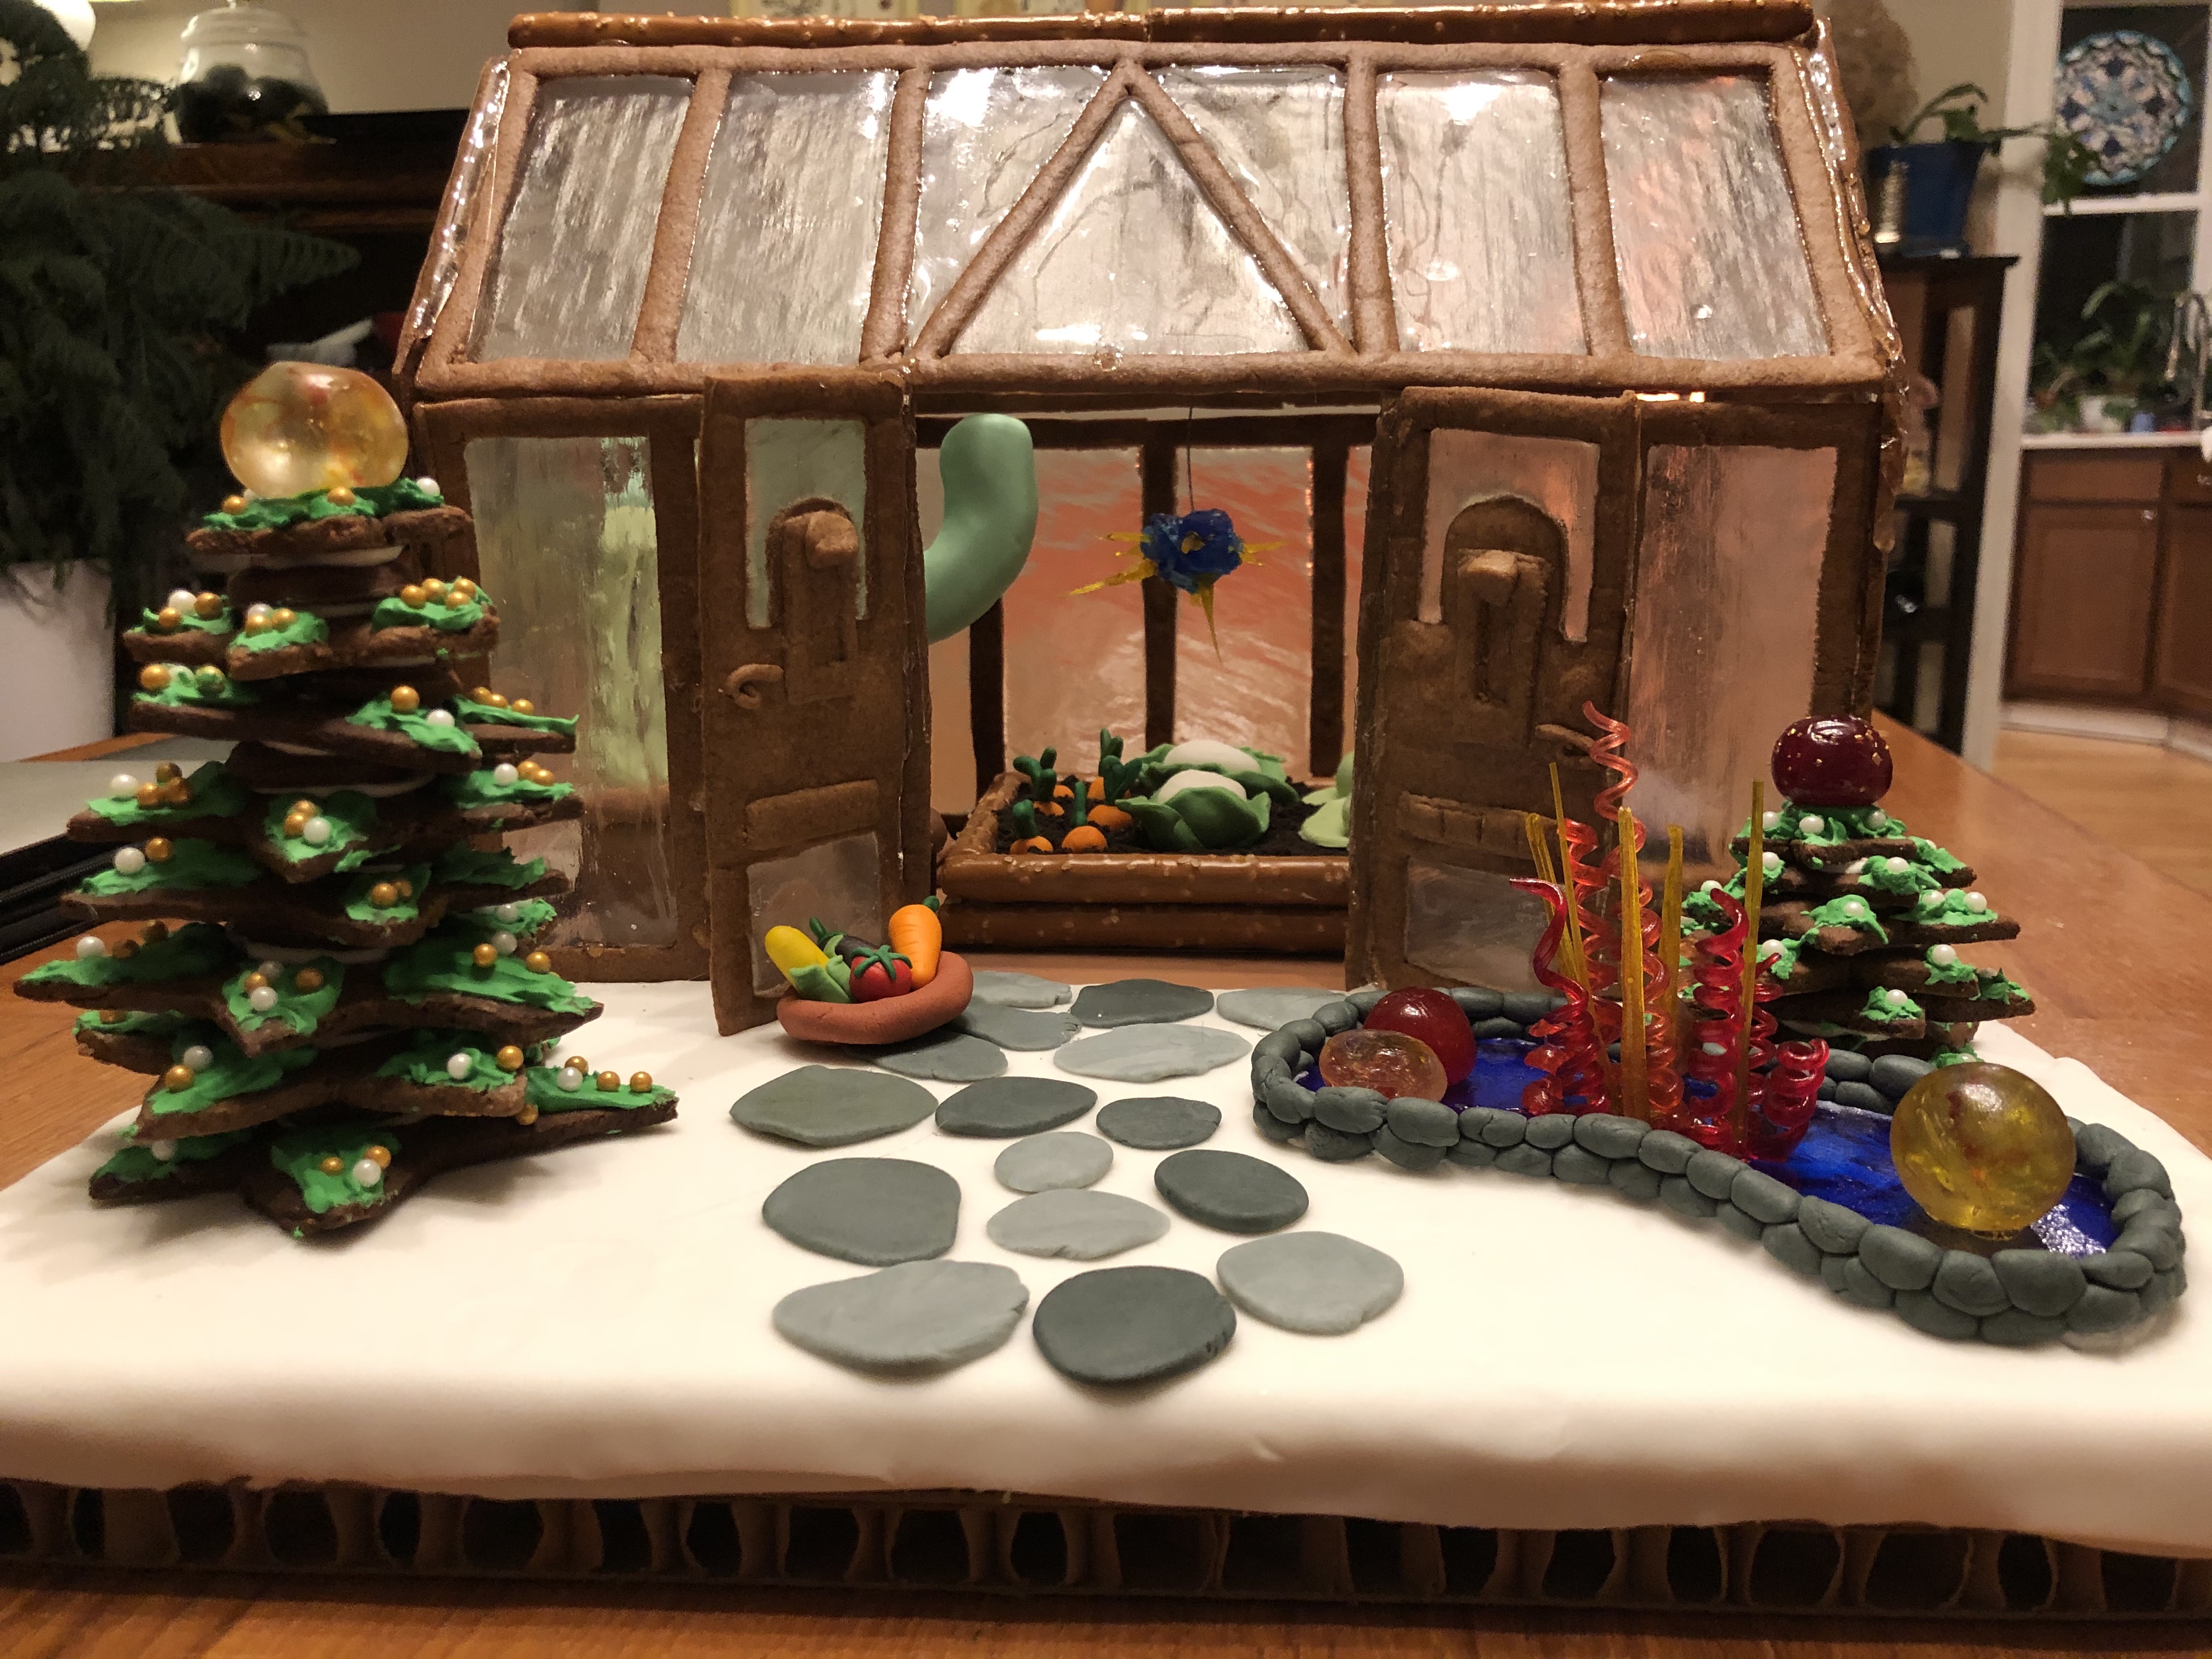 Jess wins first place in the 'adult' category for best gingerbread house at the Franklin Park Conservatory with her gingerbread greenhouse.  Note the fondant vegetables.